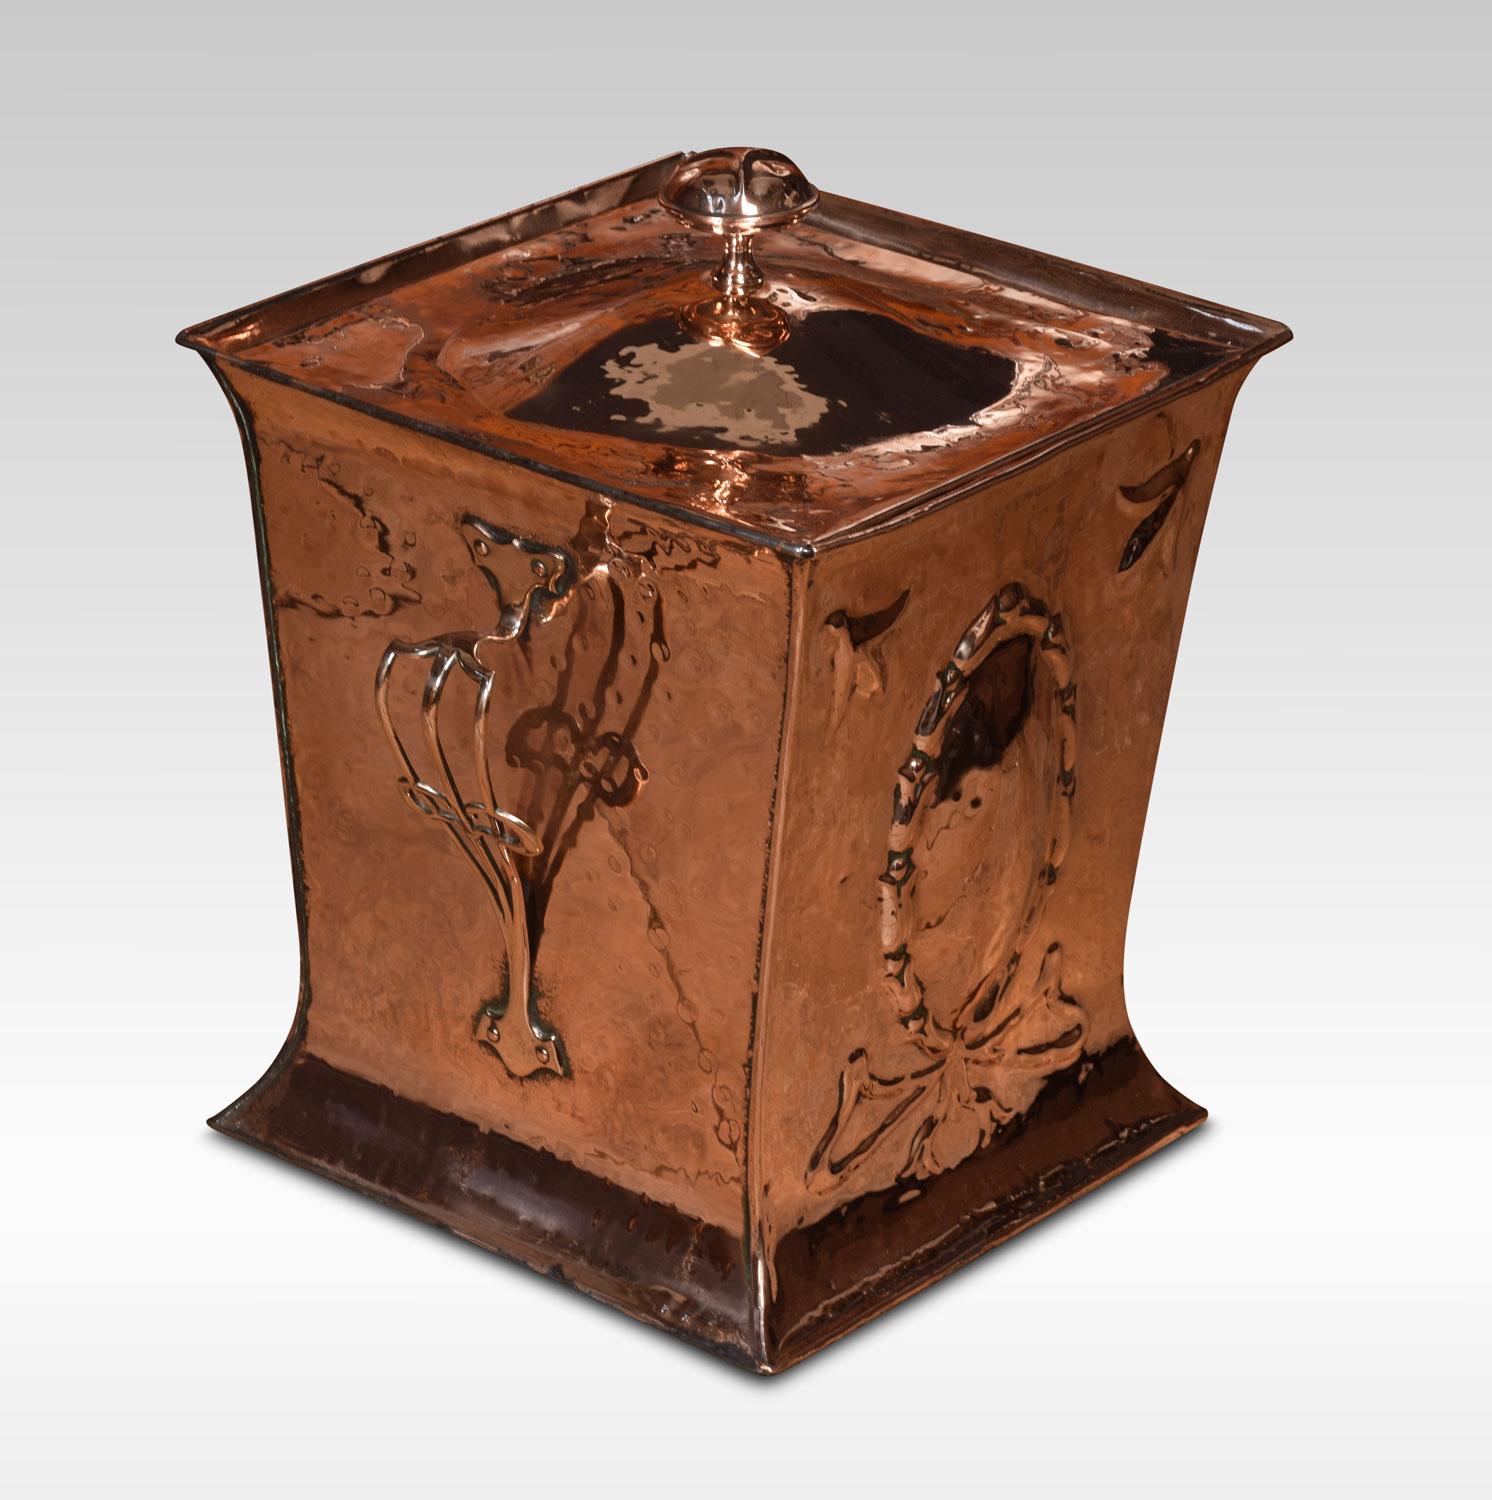 Arts & Crafts copper coal bin and cover, of square form having central beaten motif retaining its original tin liner.
Dimensions
Height 18 inches
Width 17 inches
Depth 13.5 inches.